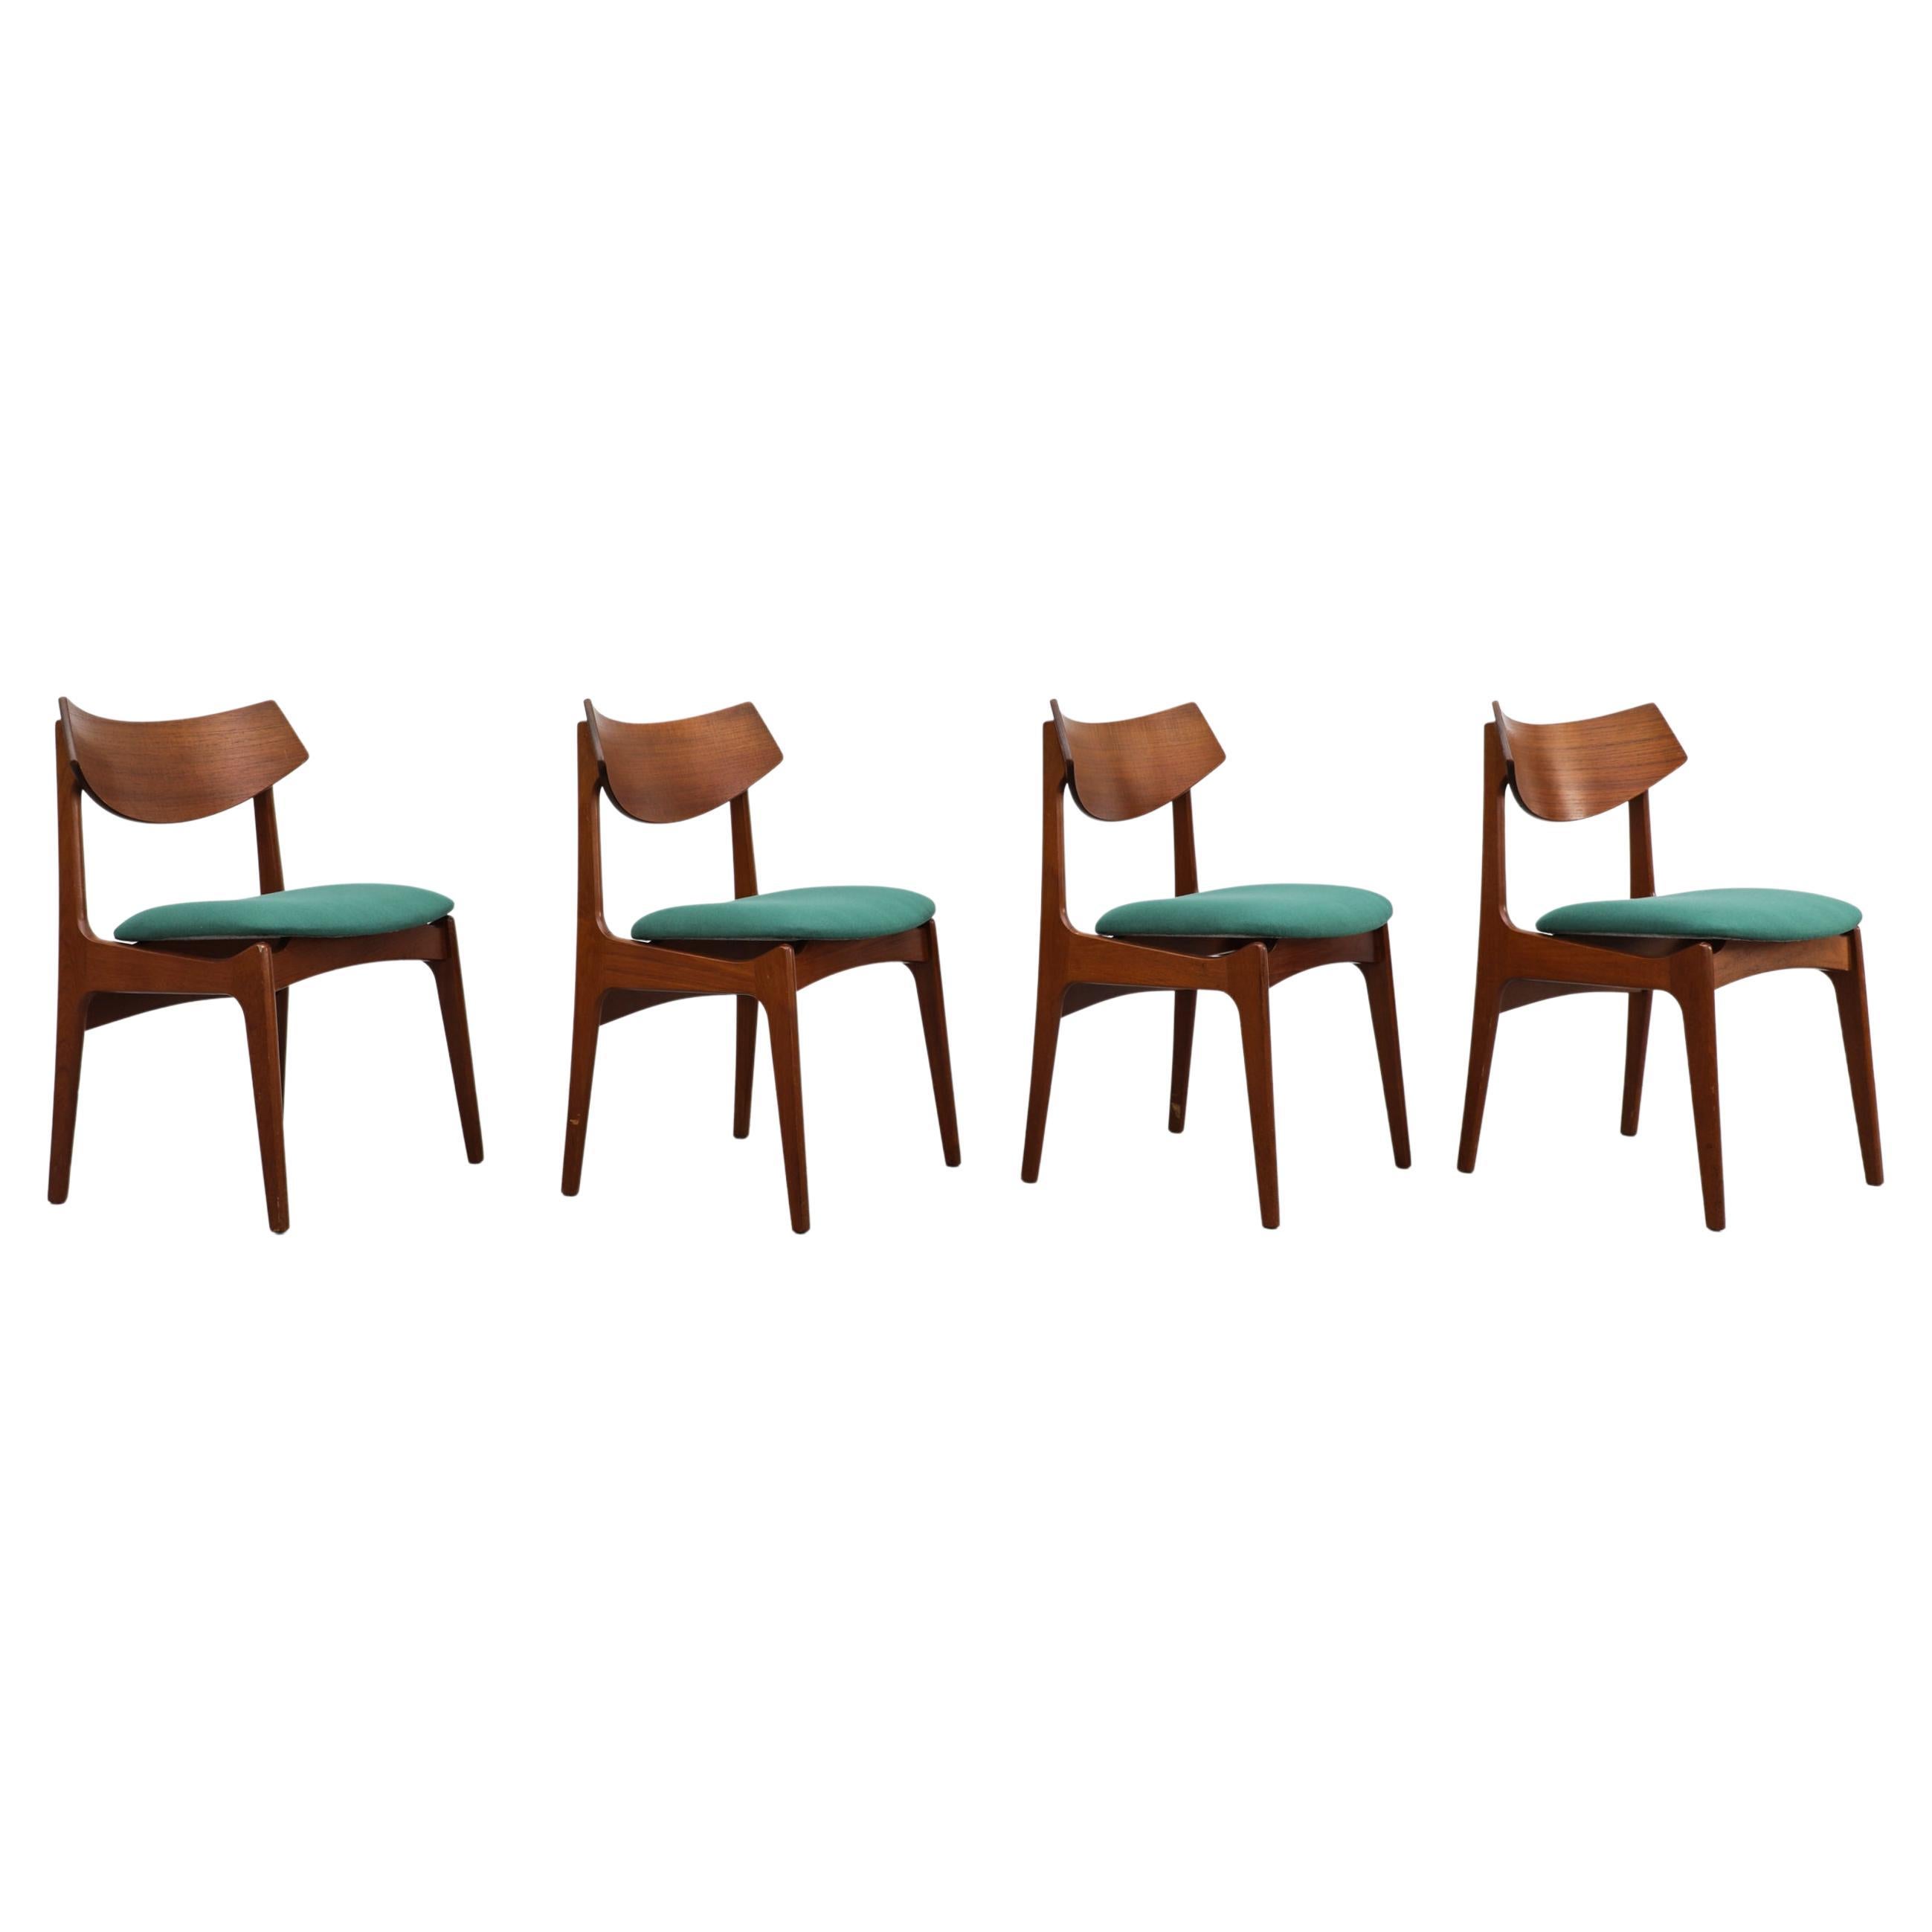 Set of 4 Danish Teak Dining Chairs by Funder Schmidt + Madsen w/ Teal Seats